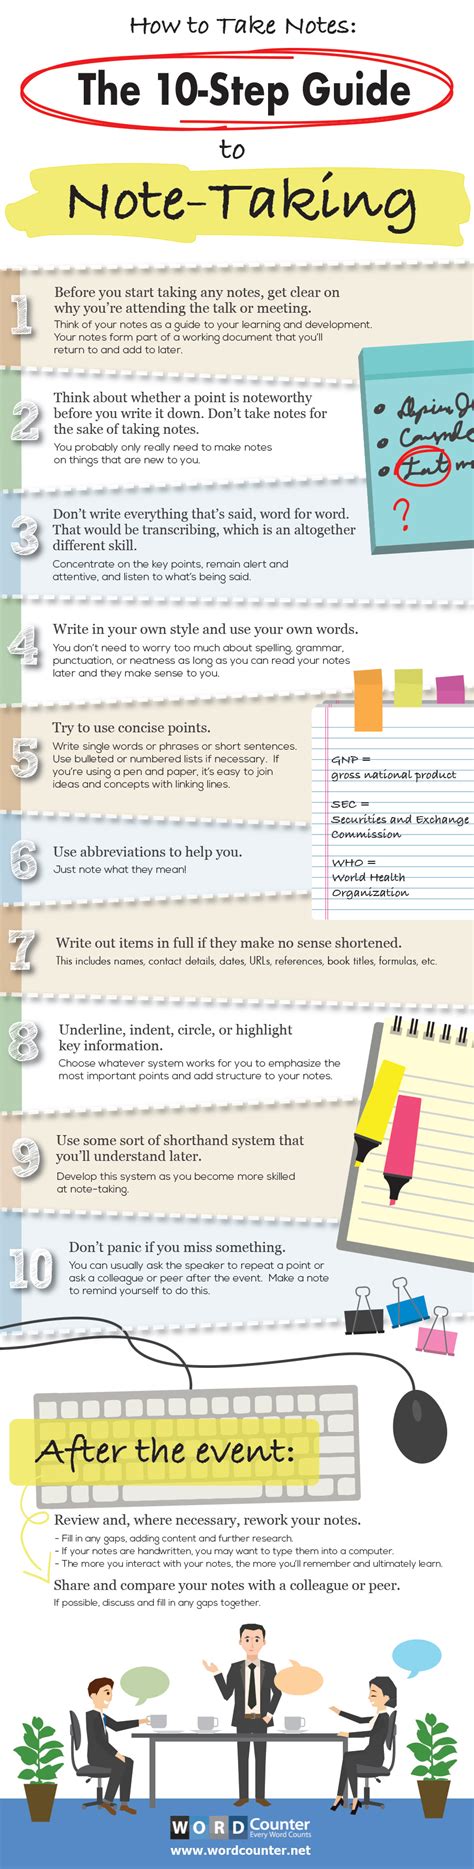 How To Take Notes The 10 Step Guide To Note Taking Infographic